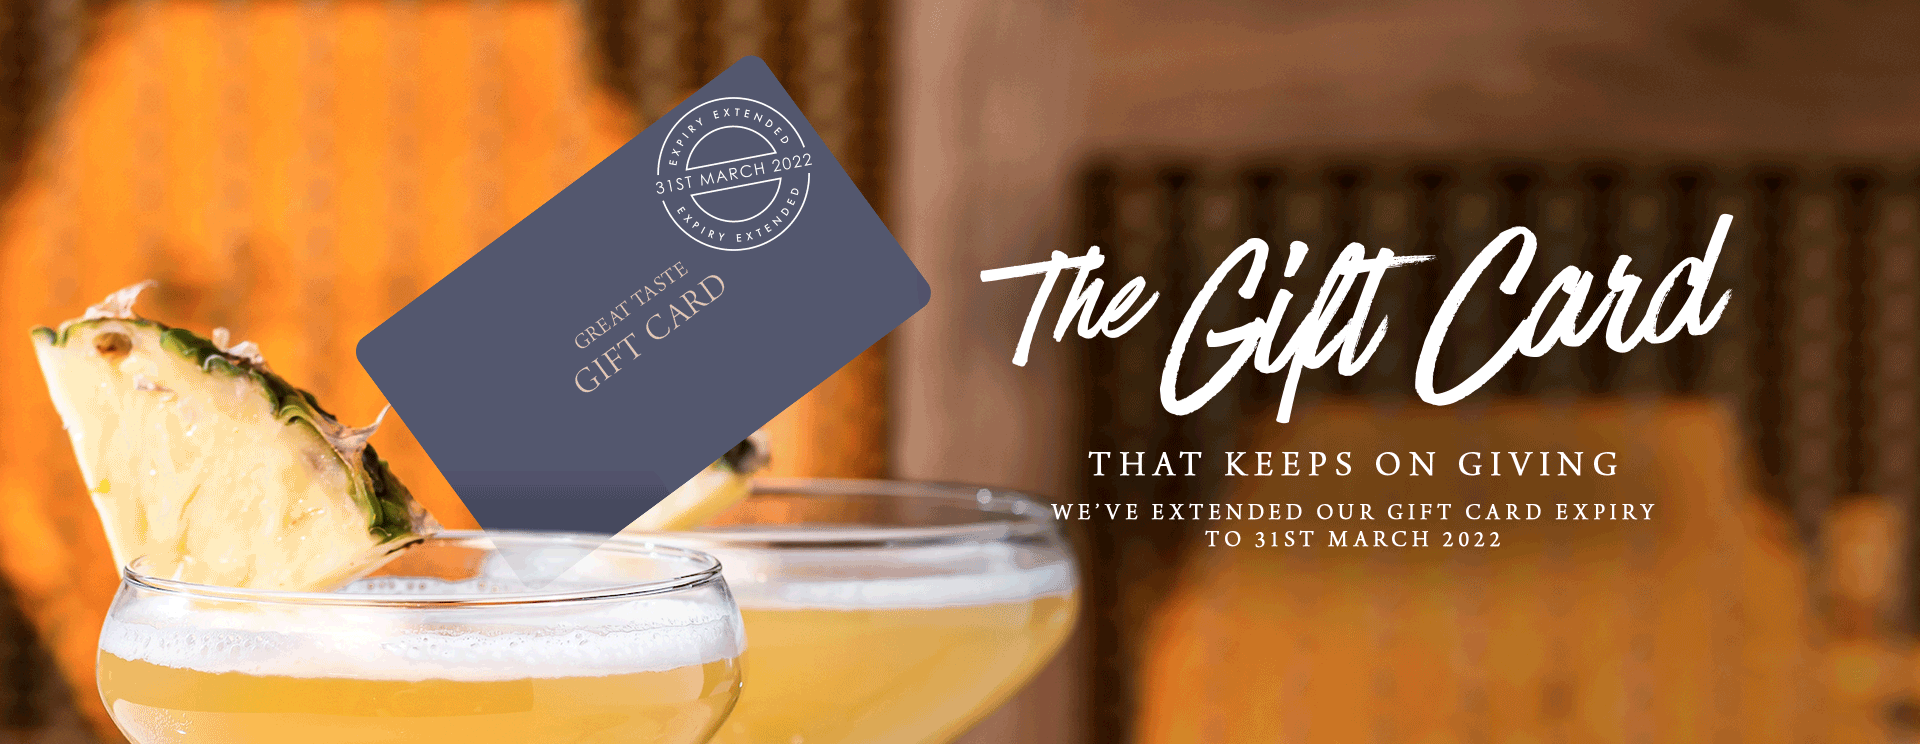 Give the gift of a gift card at The Whittington Arms